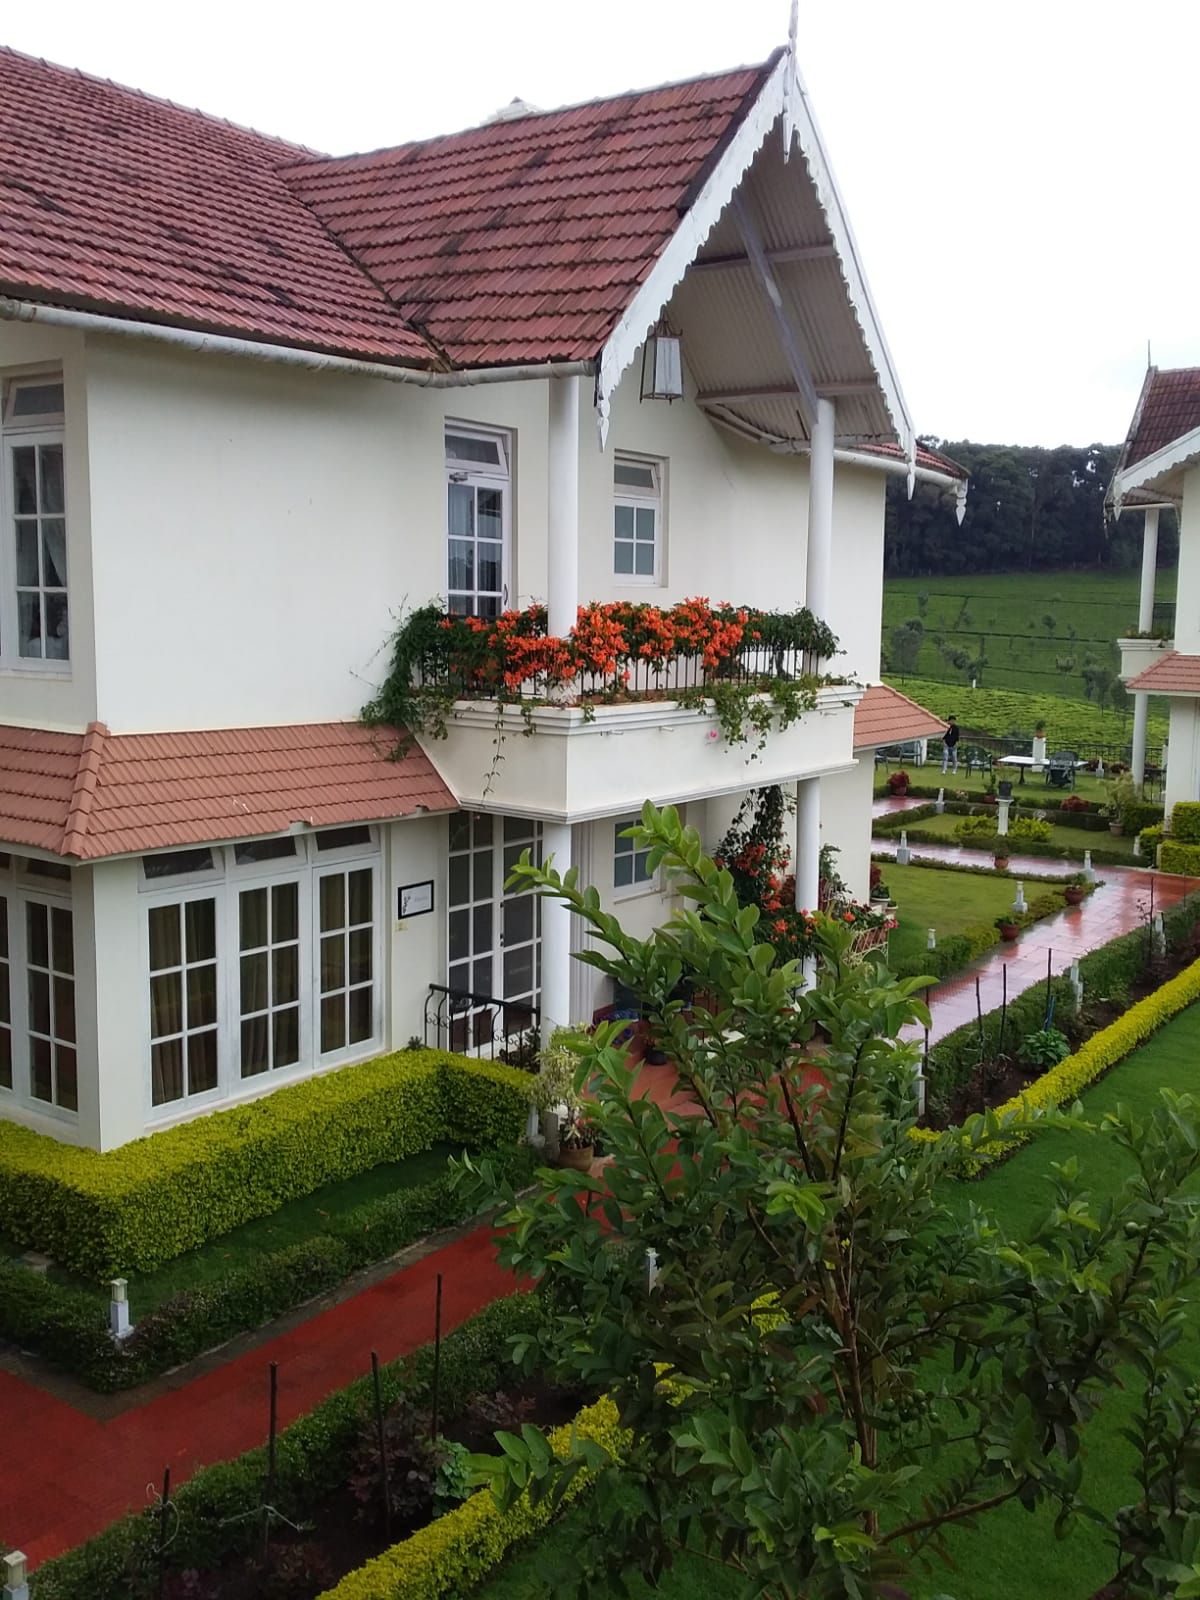 For sale: Property at Gated community location near Ooty